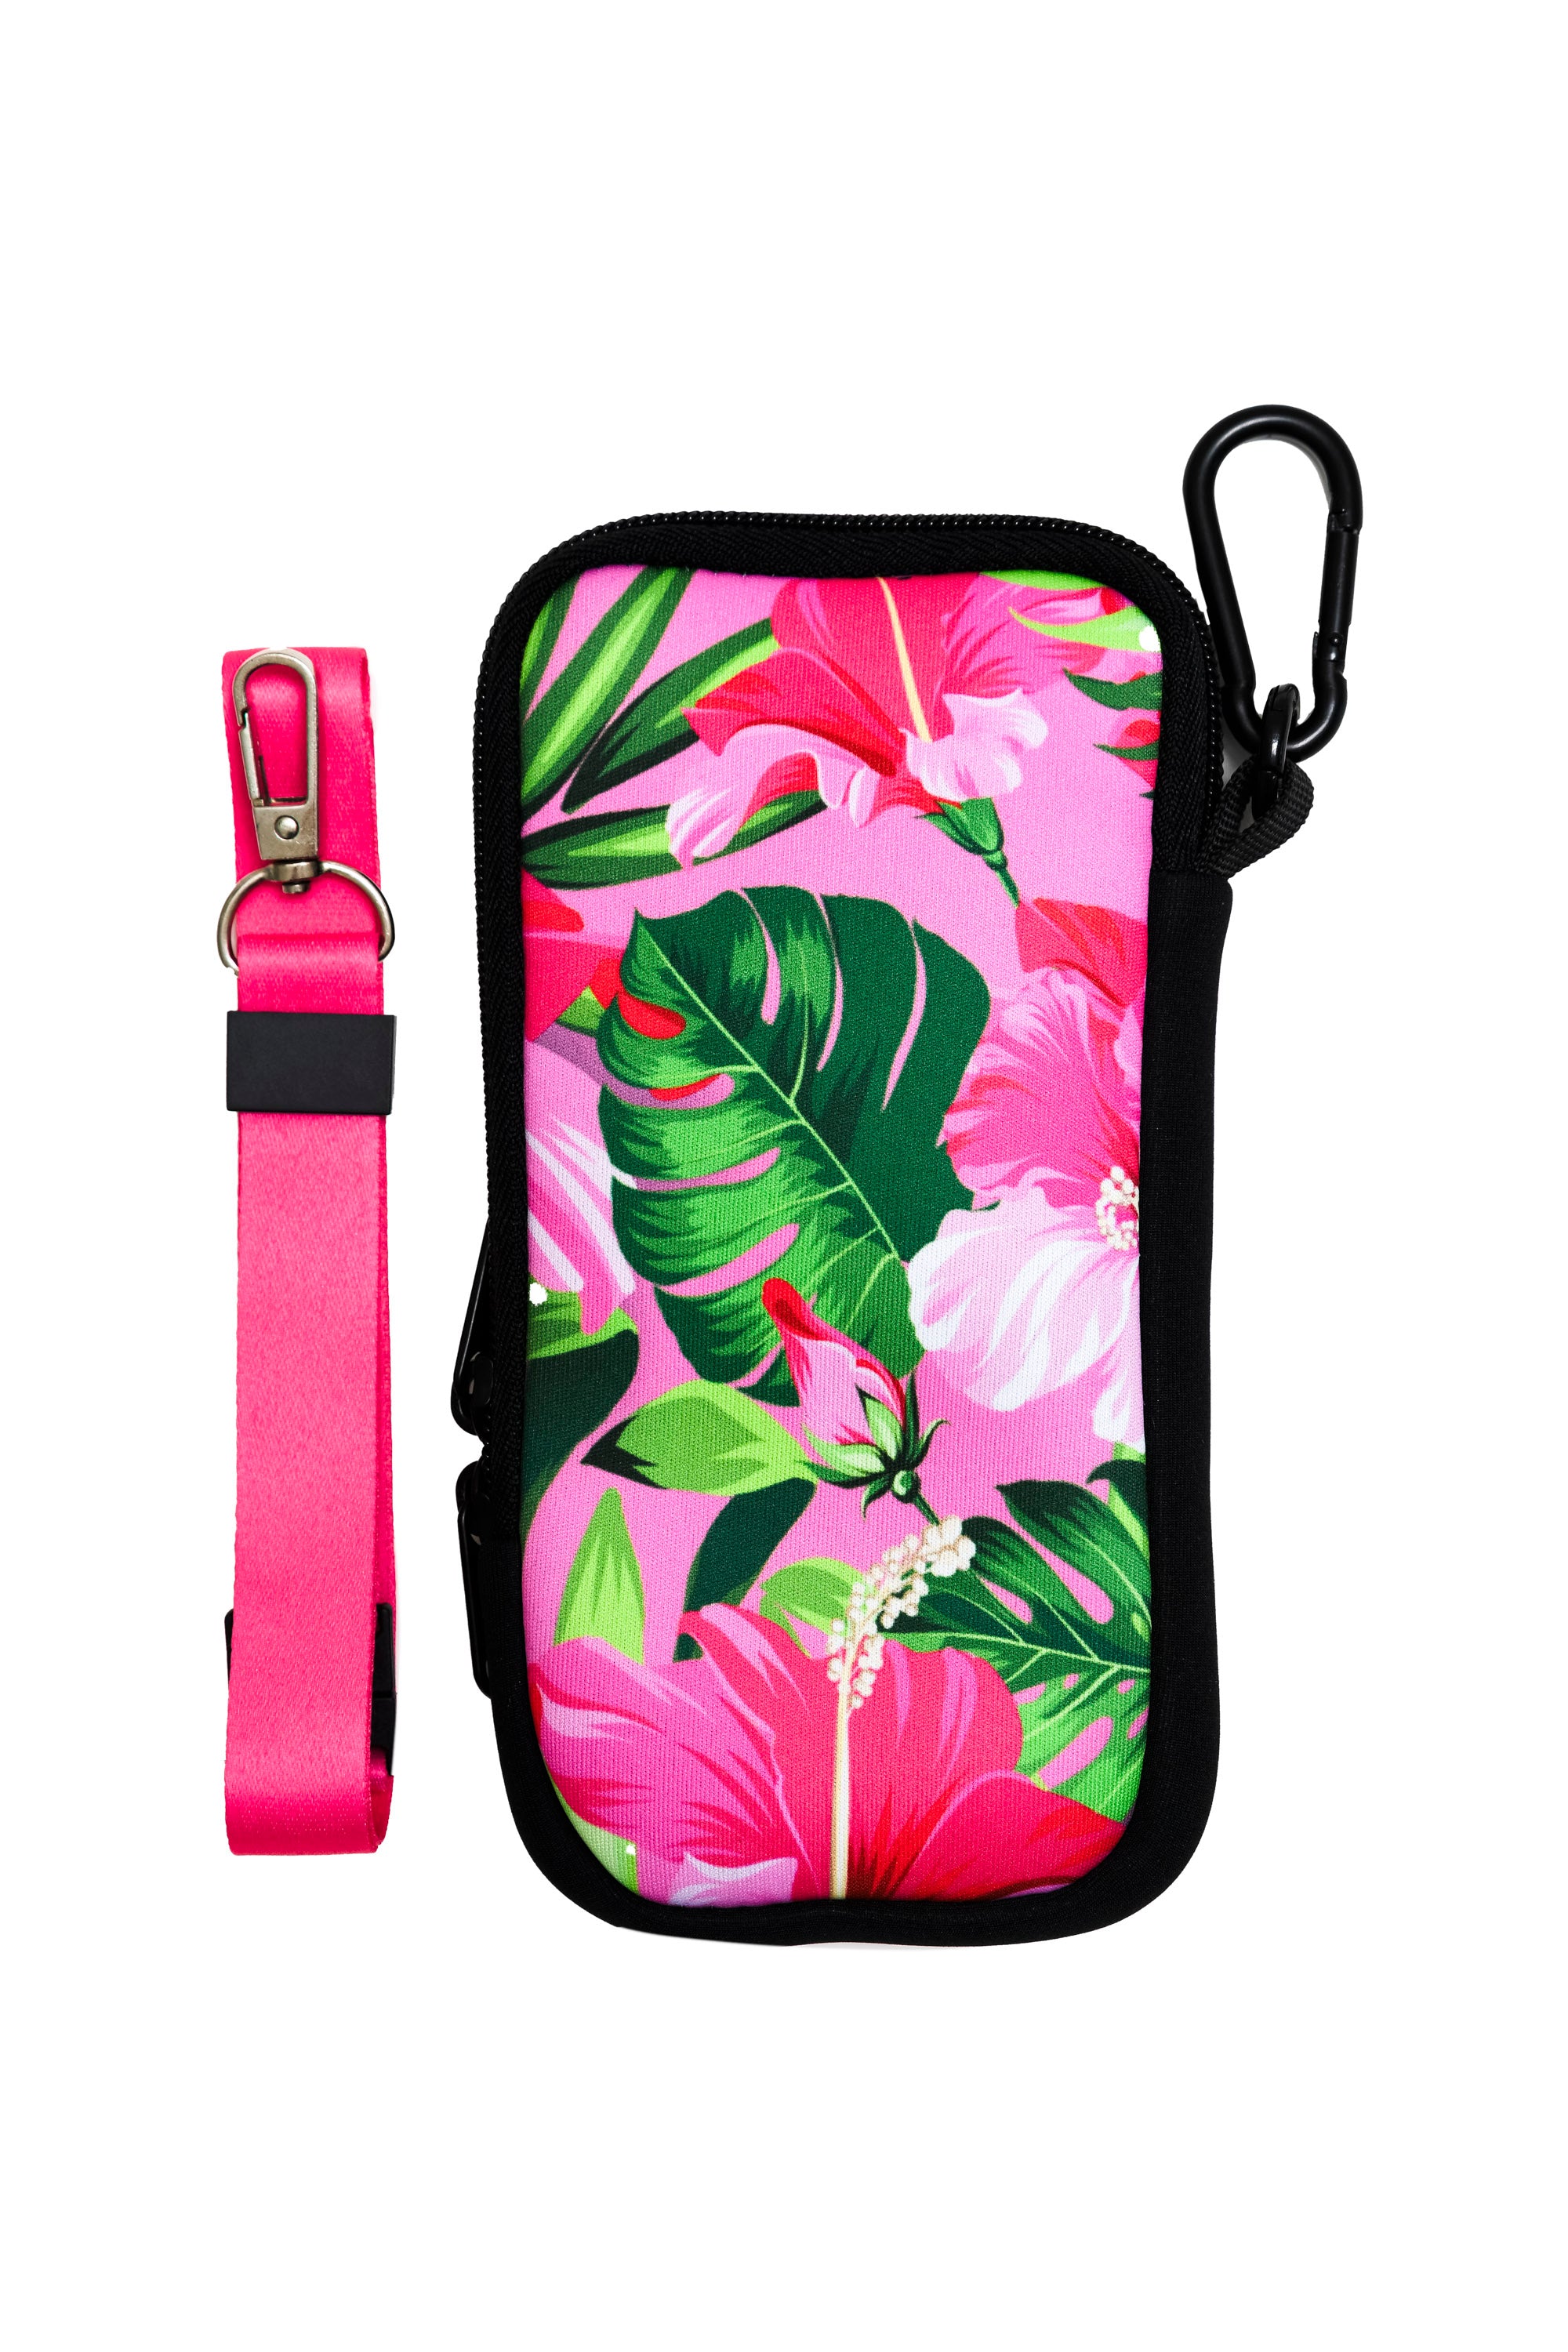 Travel Pouch with Detachable Lanyard - Pink Hibiscus